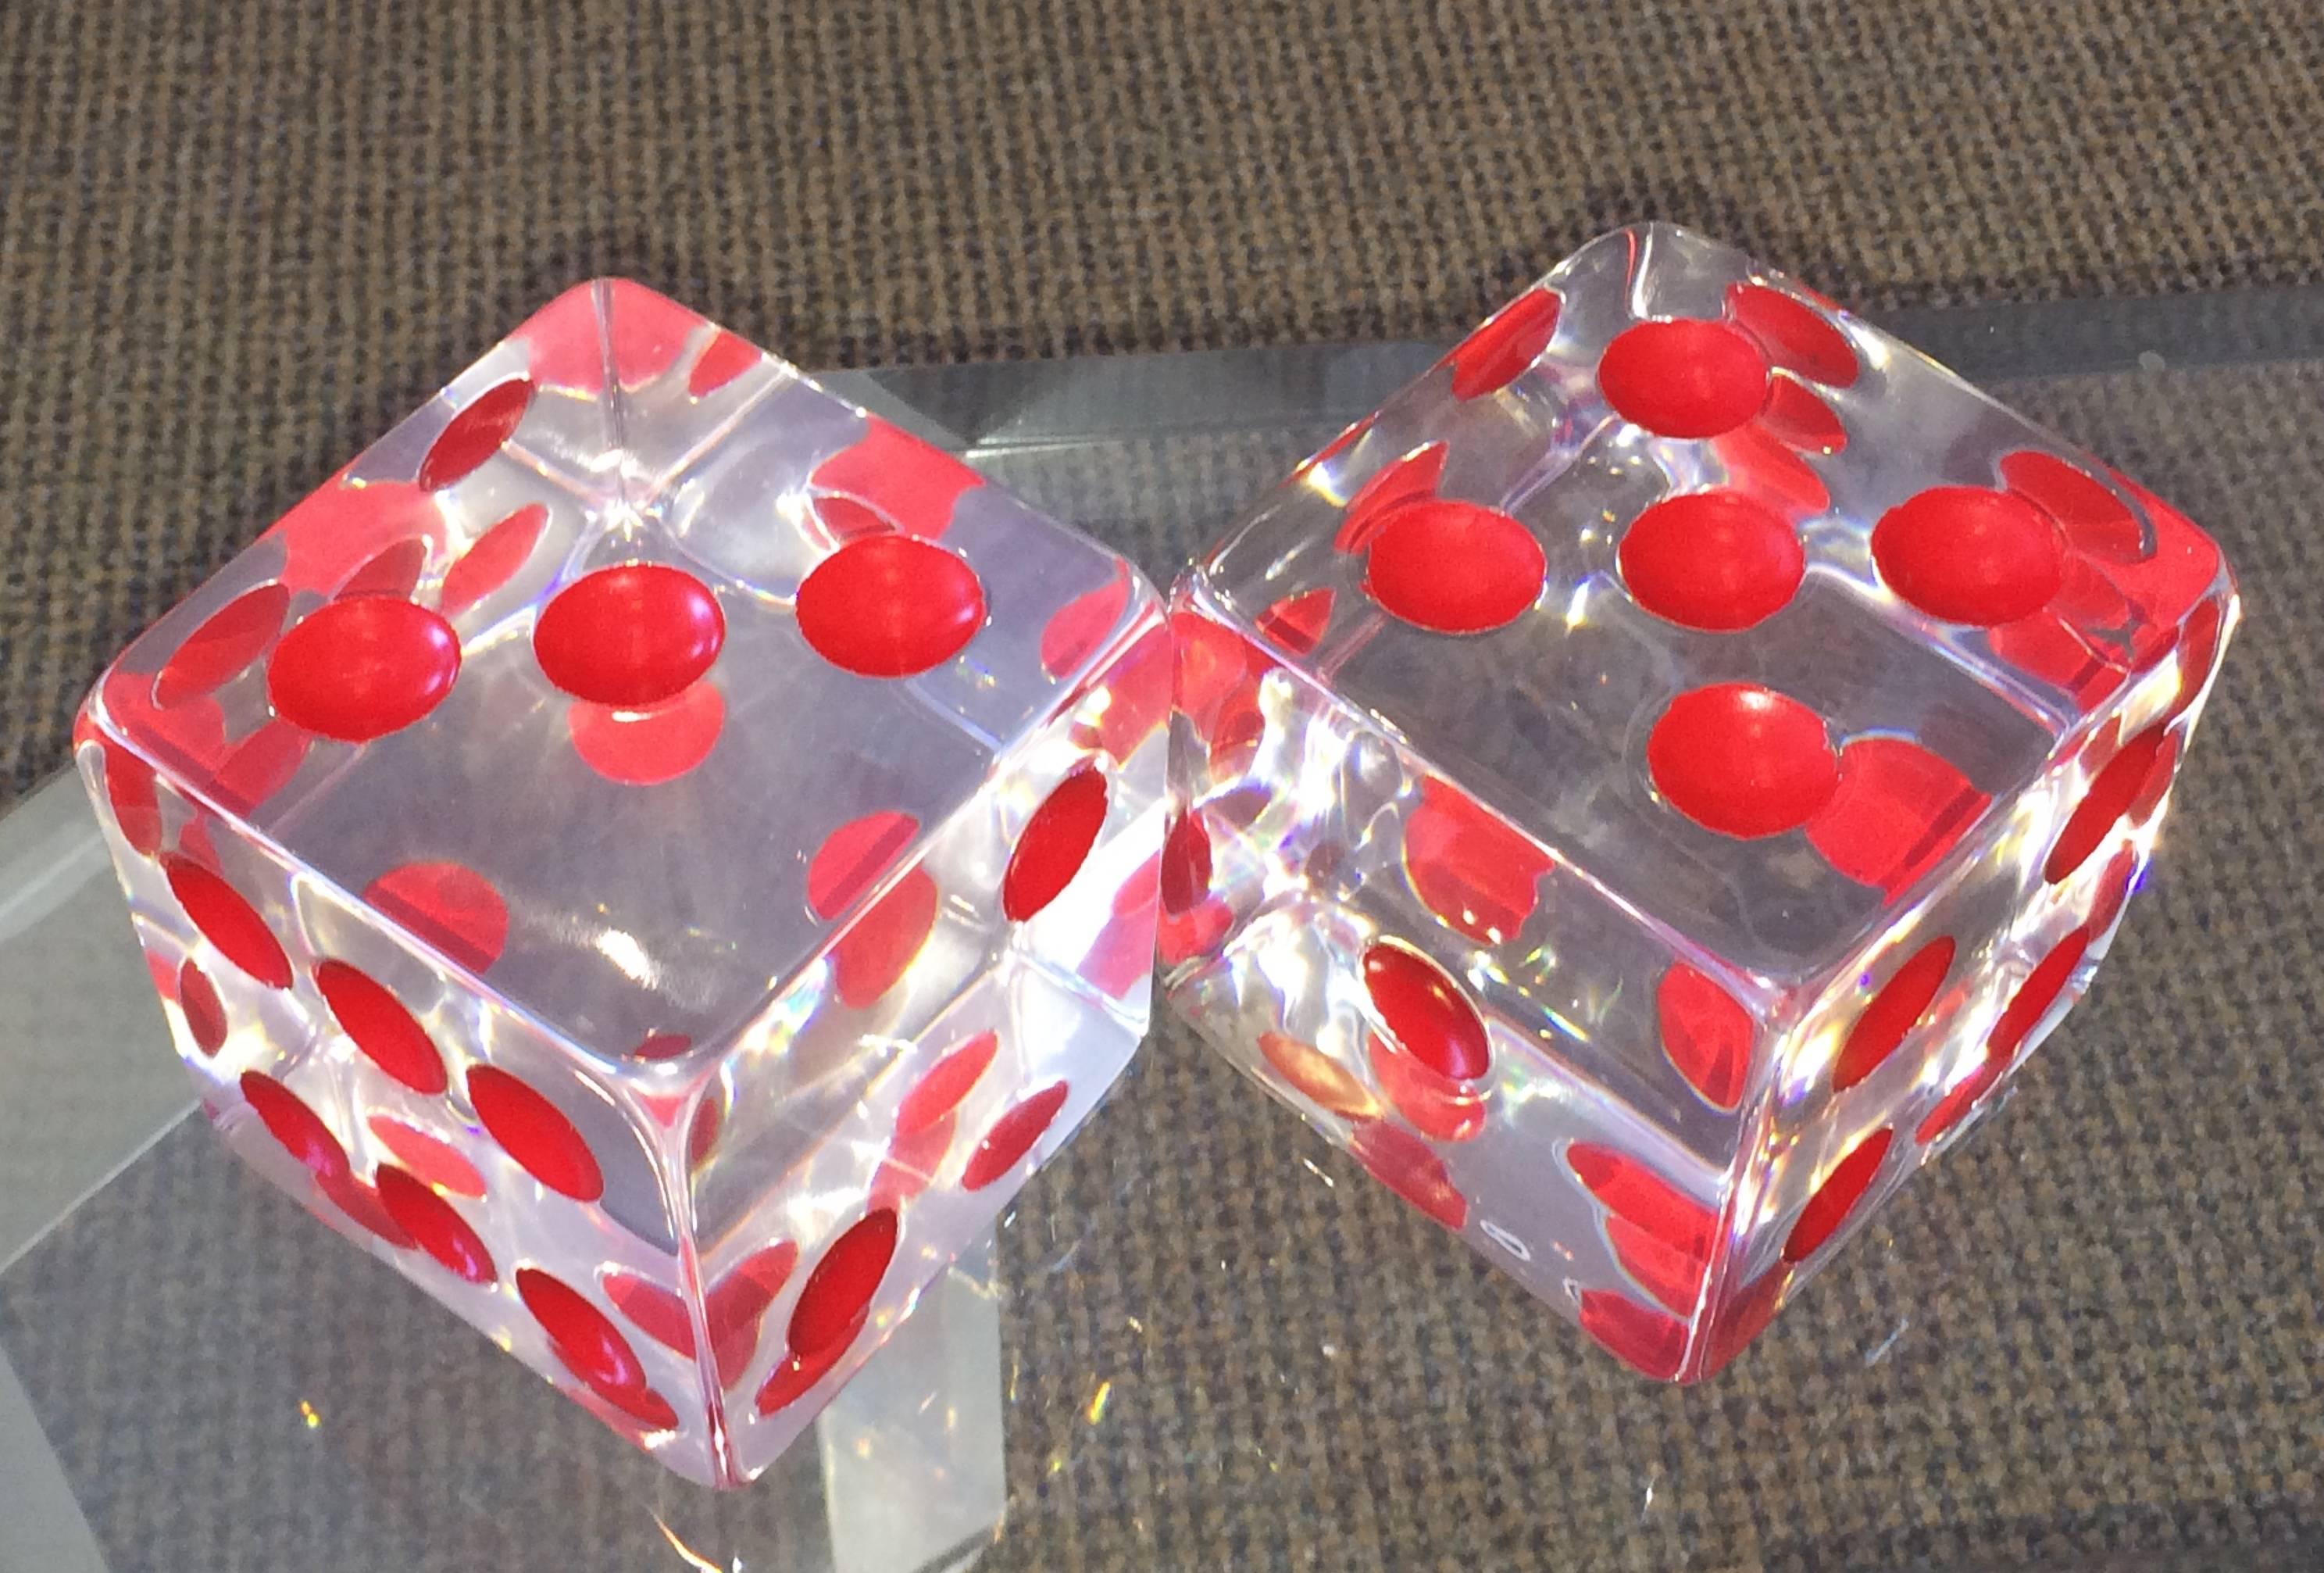 Mid-Century Modern Oversized Dice Sculpture with Red Dots by Charles Hollis Jones